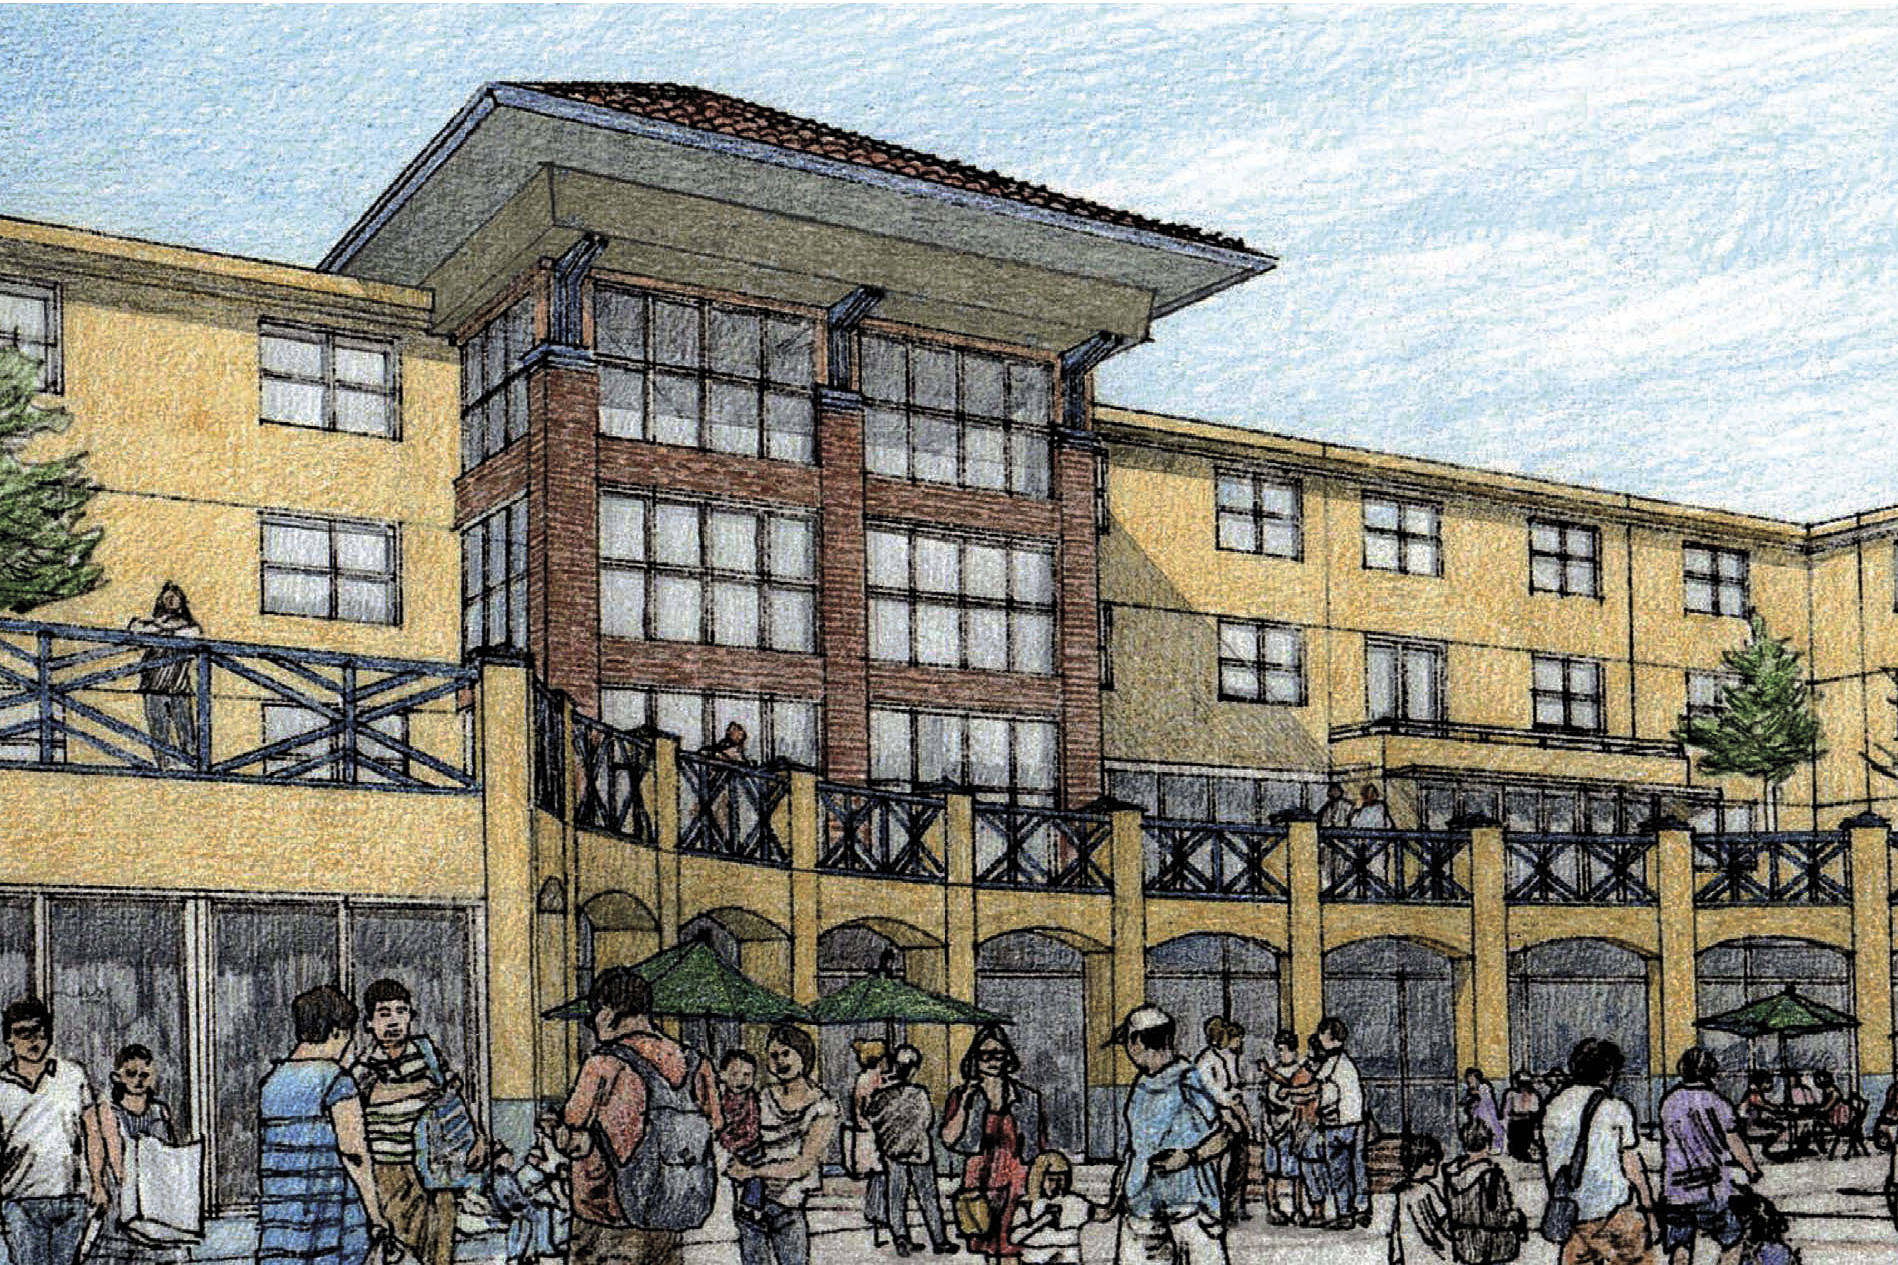 Groundbreaking for the Filipino Community Village project is slated to begin in 2019. Photo courtesy of the Filipino Community of Seattle.